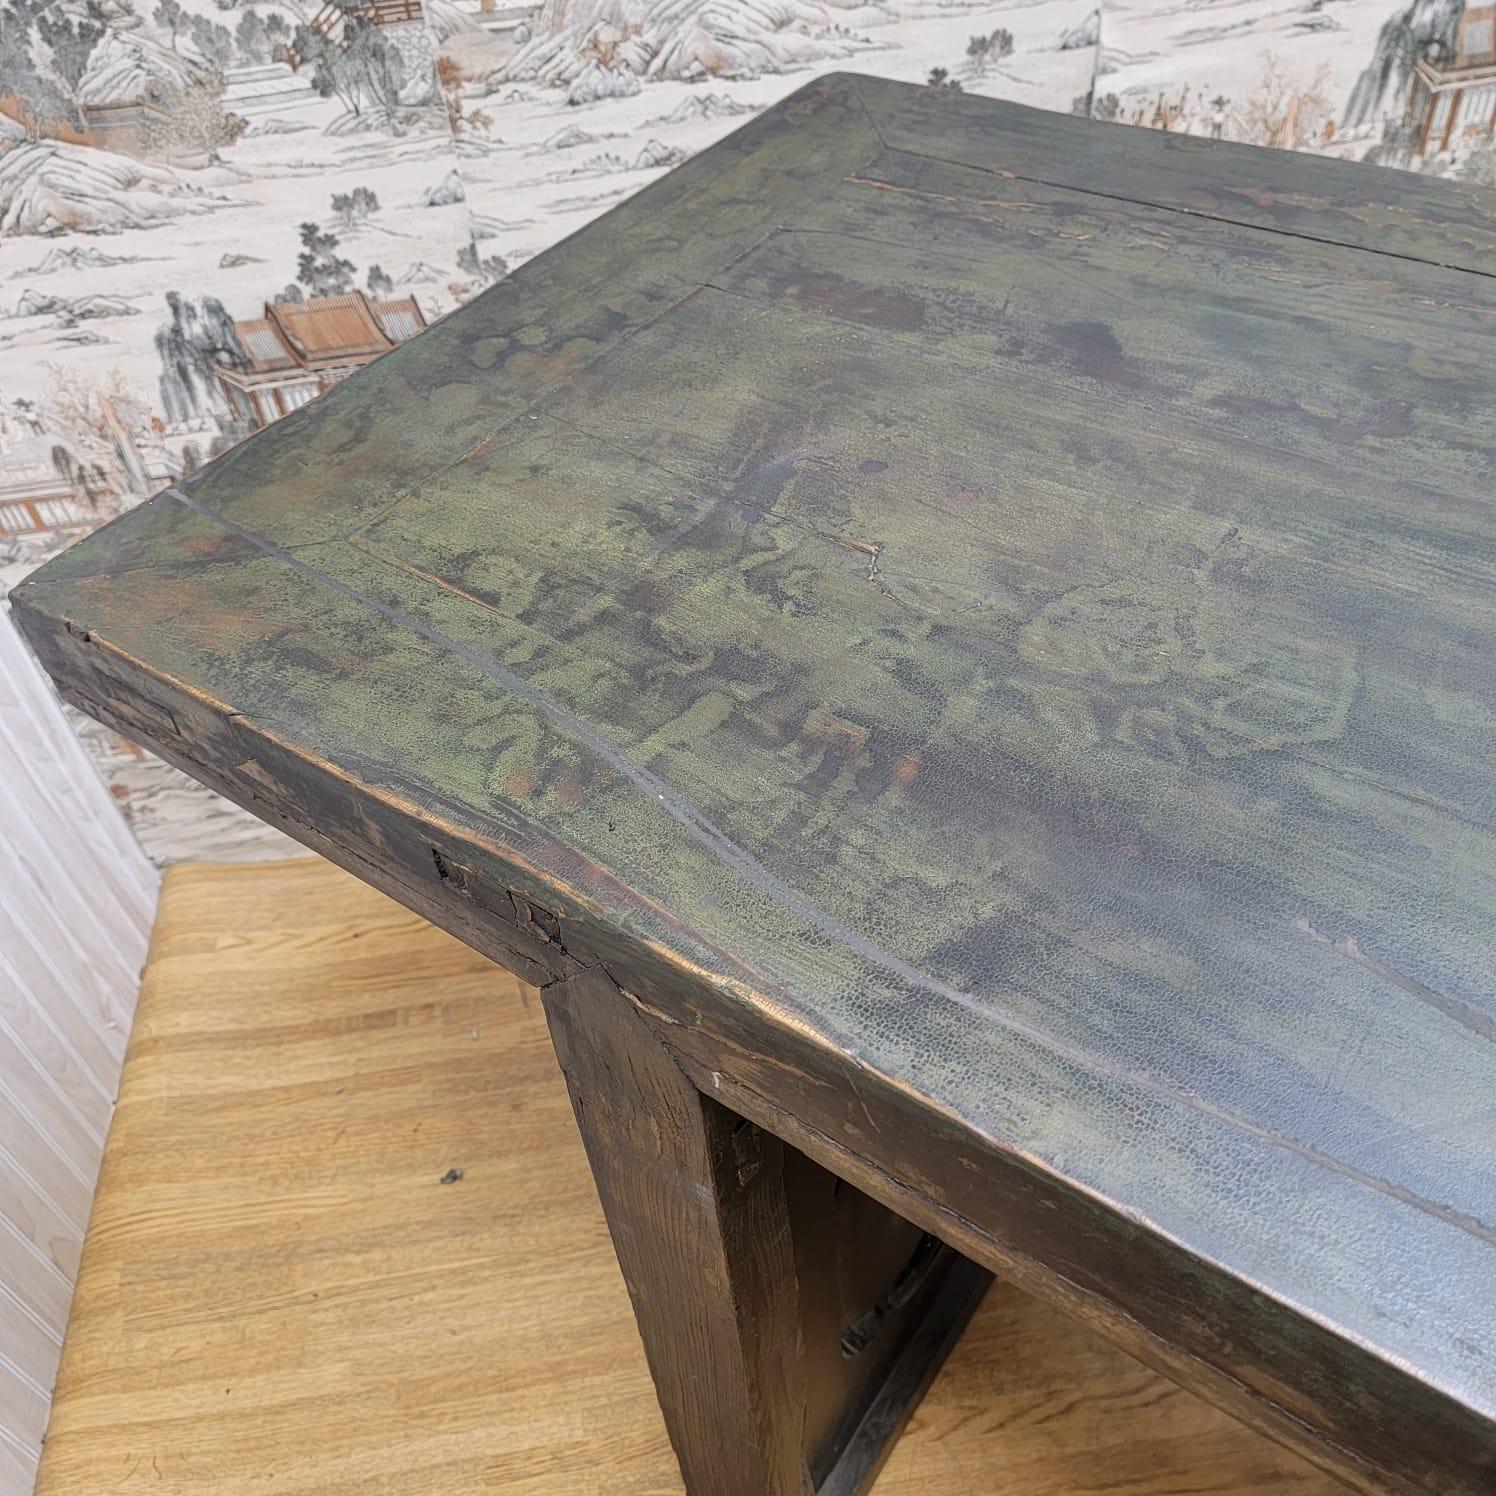 Vintage Shanxi Province Long Elm Calligraphy Table With Carved Legs

Circa: 1950

Dimensions:

W: 112